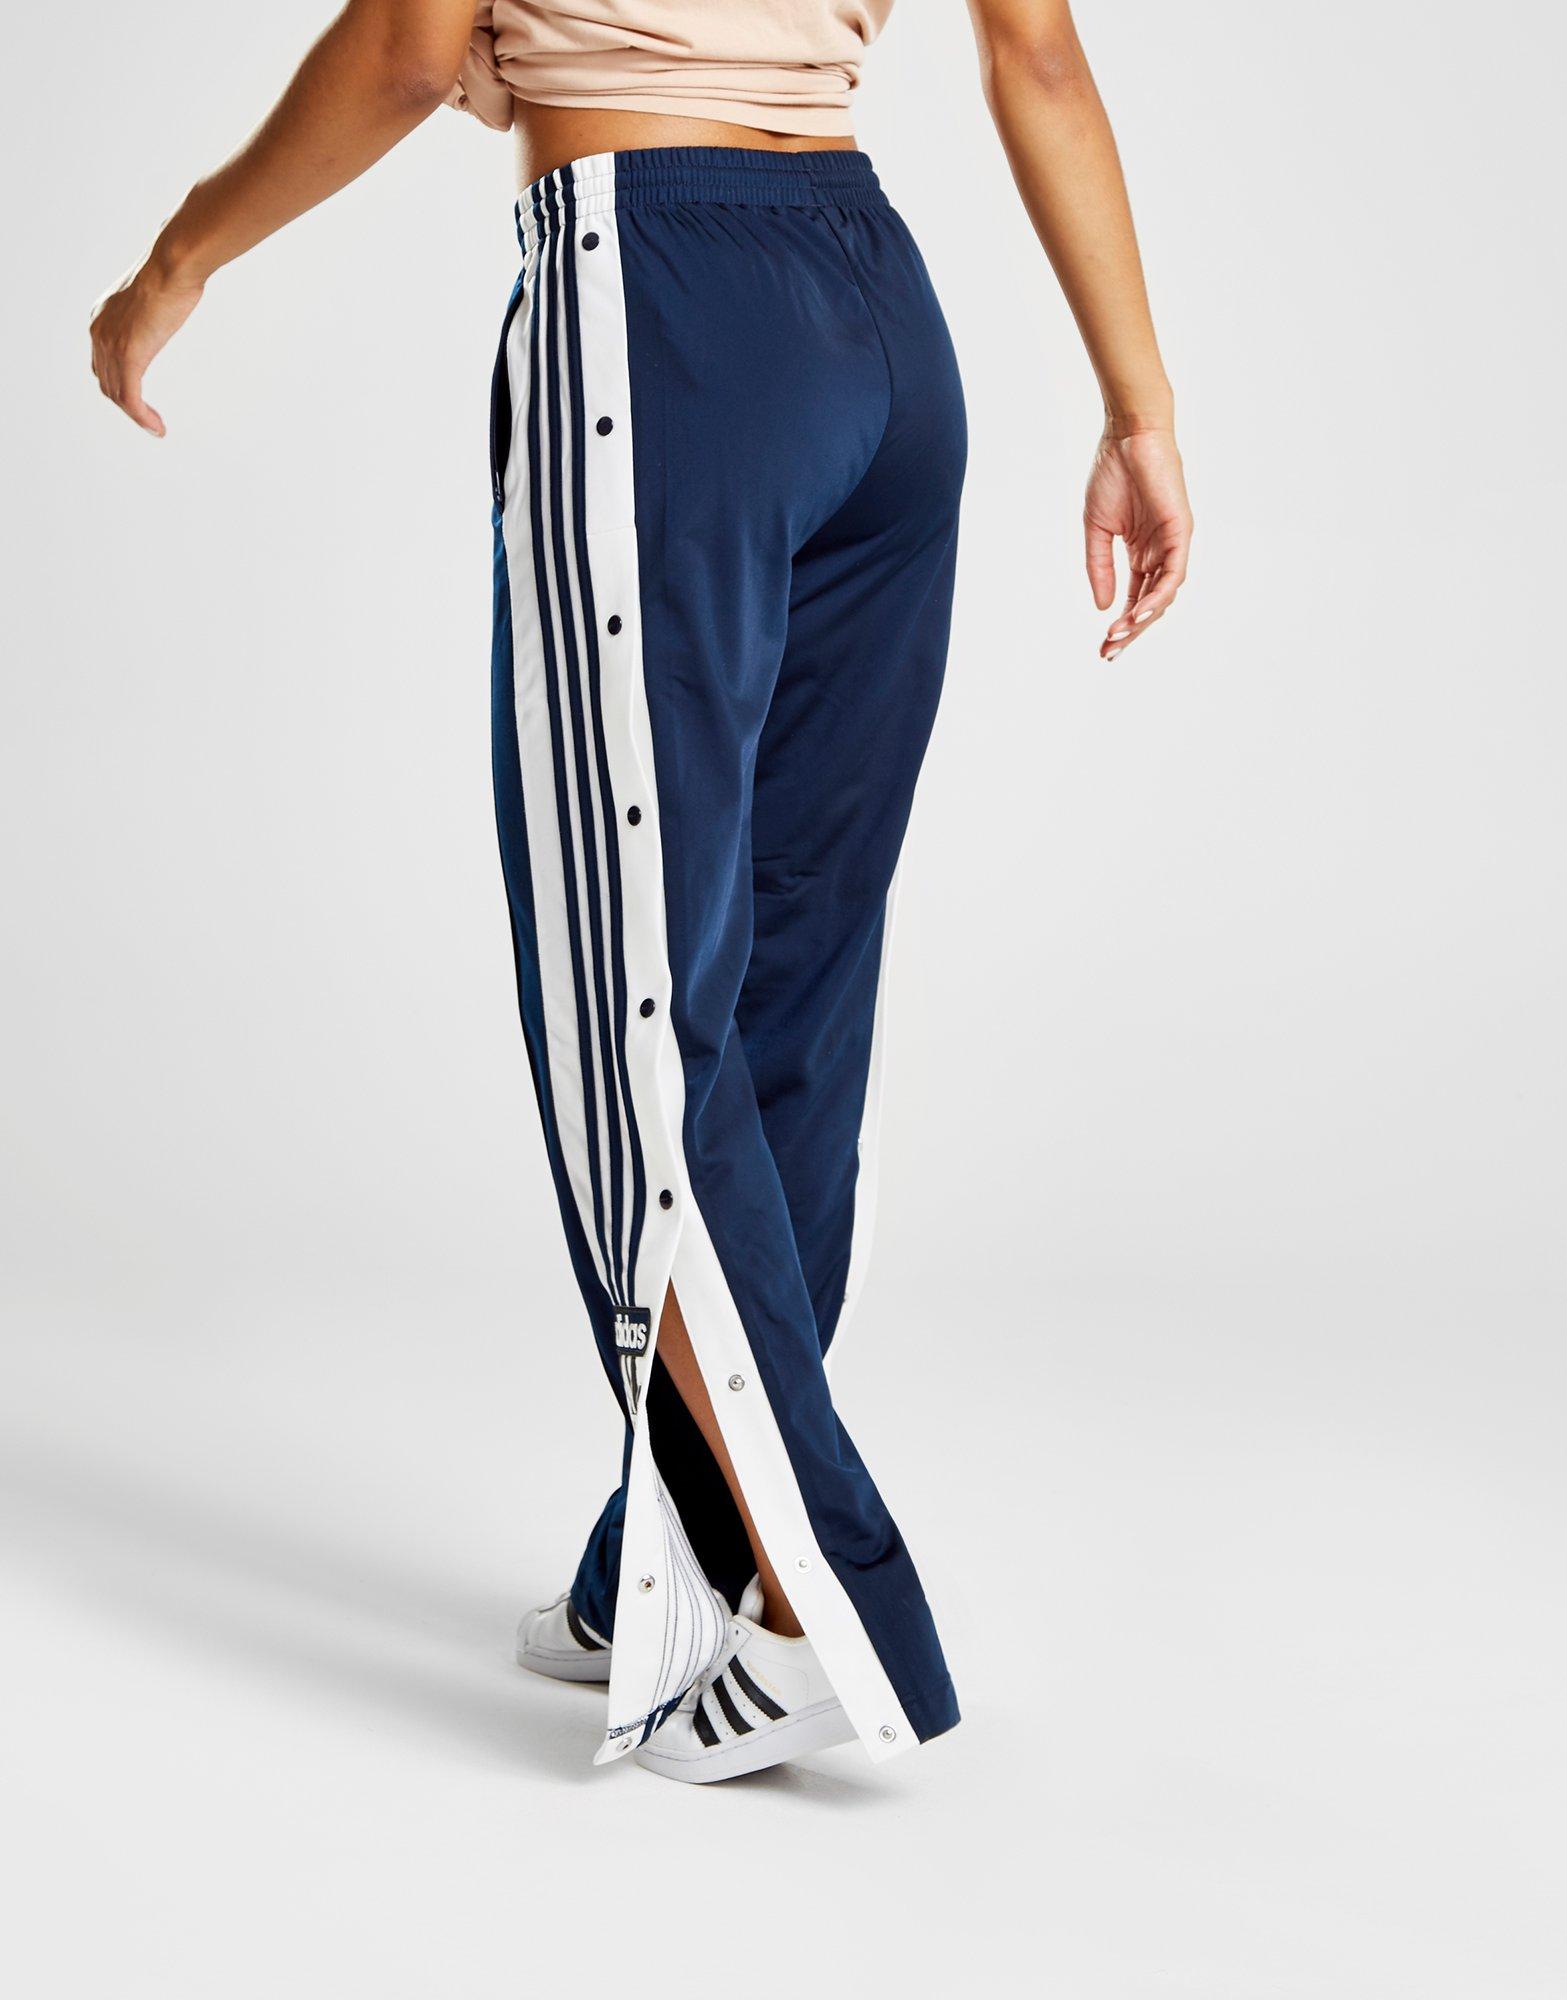 adidas trousers with poppers